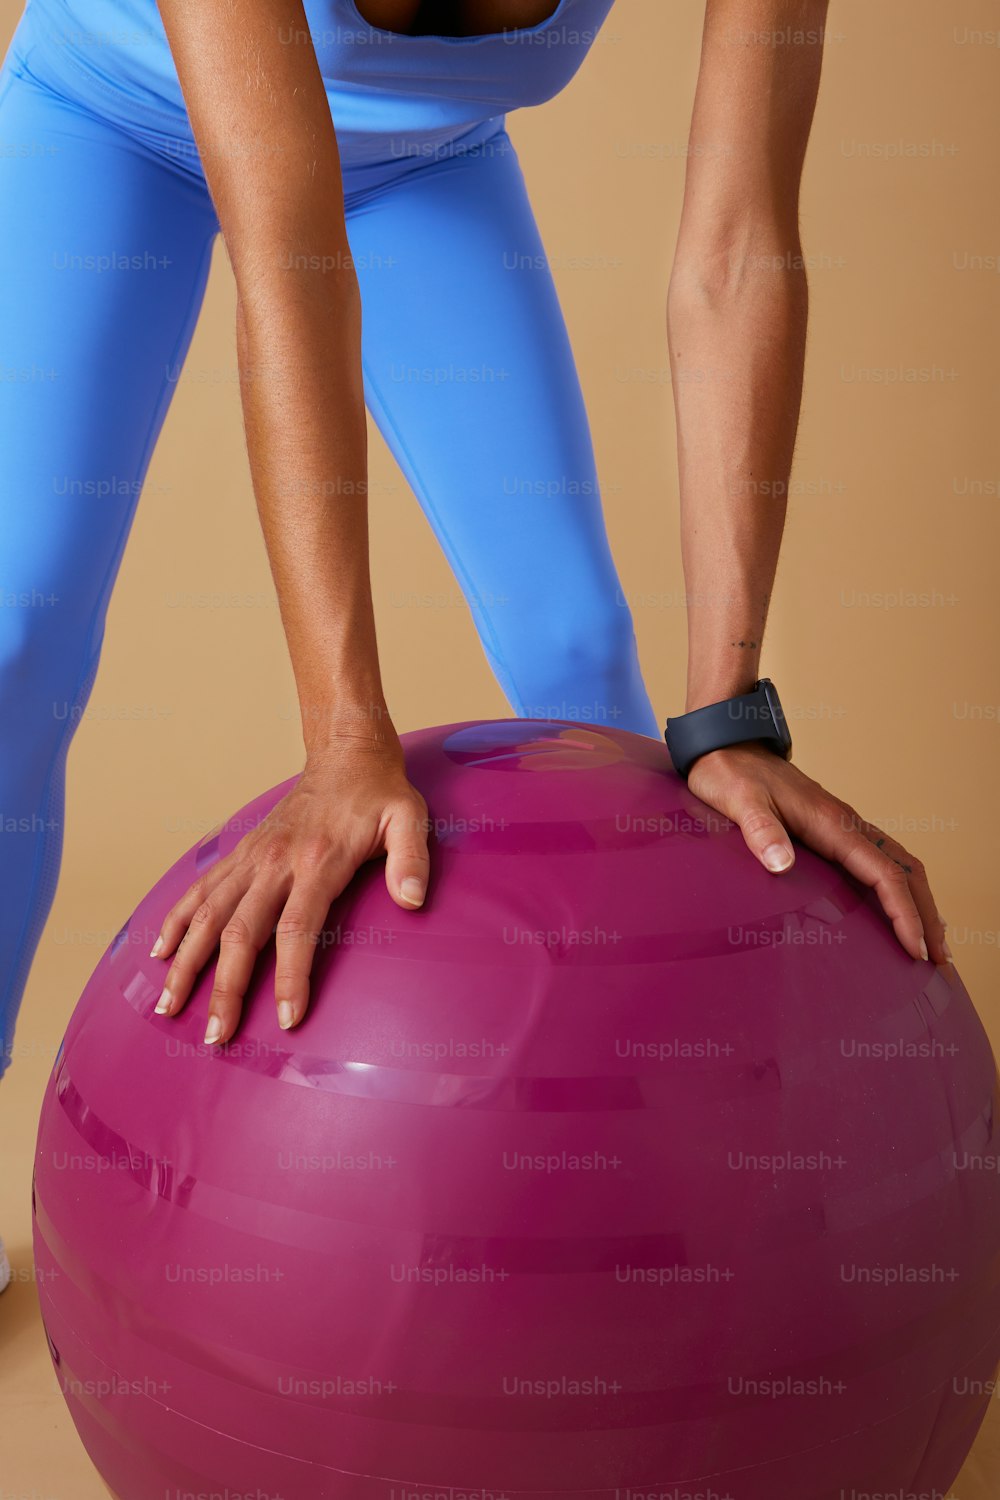 a woman in a blue top is doing exercises on a pink exercise ball